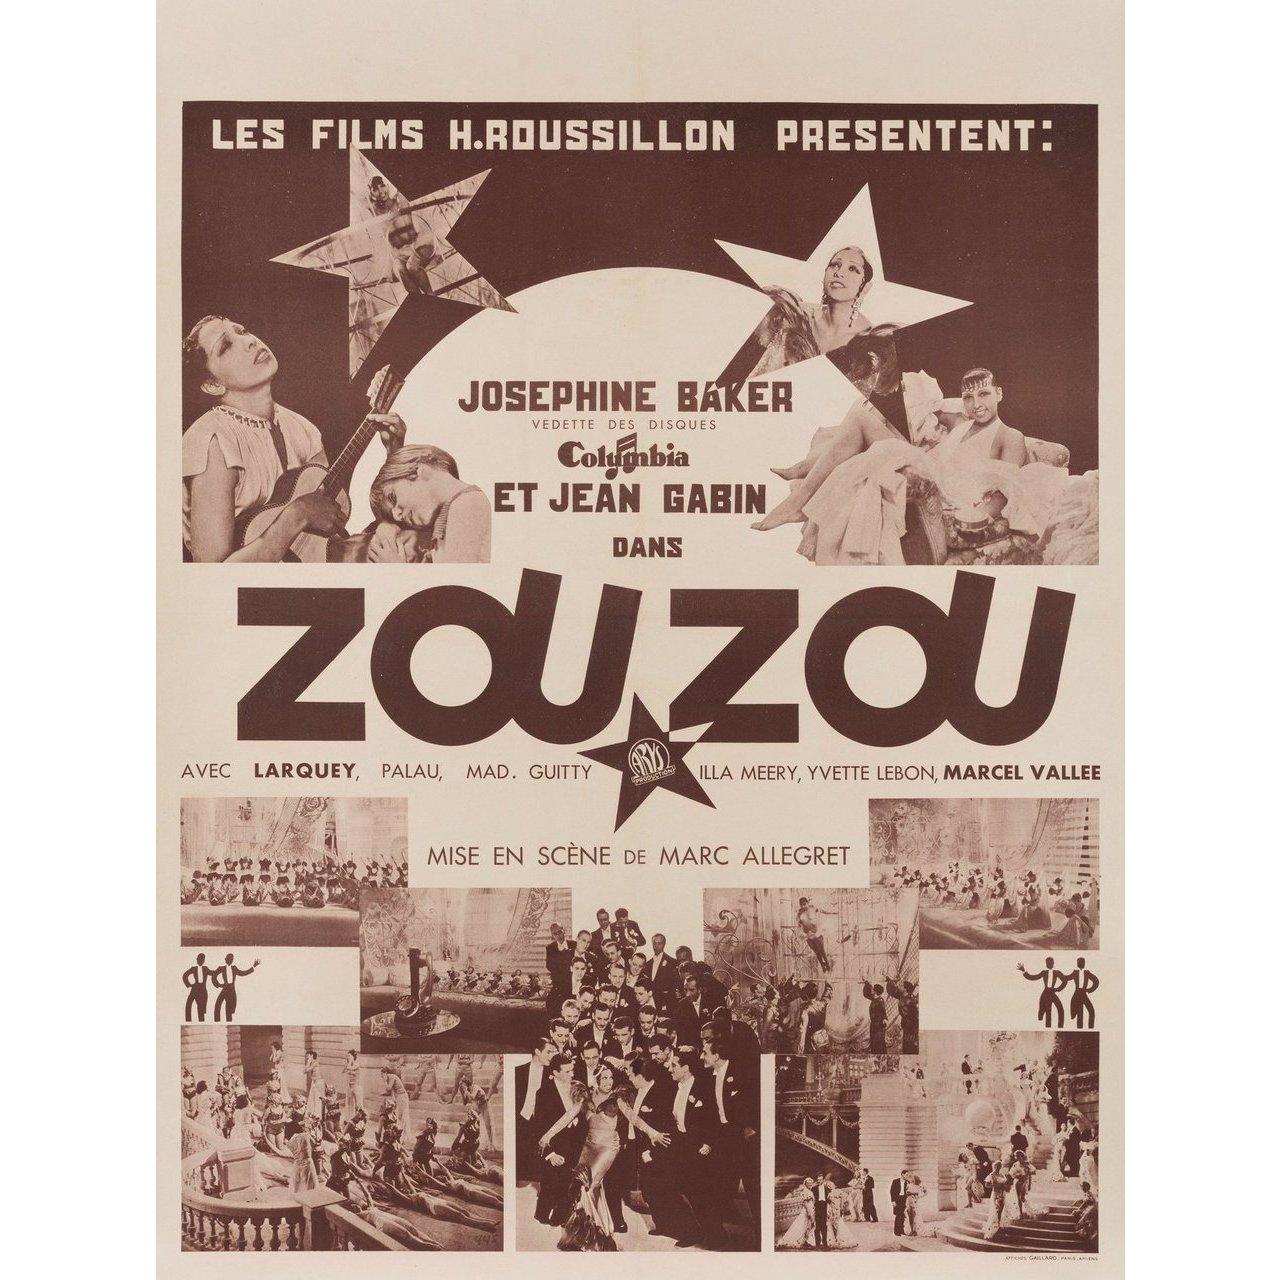 Original 1934 French moyenne poster for the film Zouzou directed by Marc Allegret with Josephine Baker / Jean Gabin / Pierre Larquey / Yvette Lebon. Fine condition, linen-backed. This poster has been professionally linen-backed. Please note: the